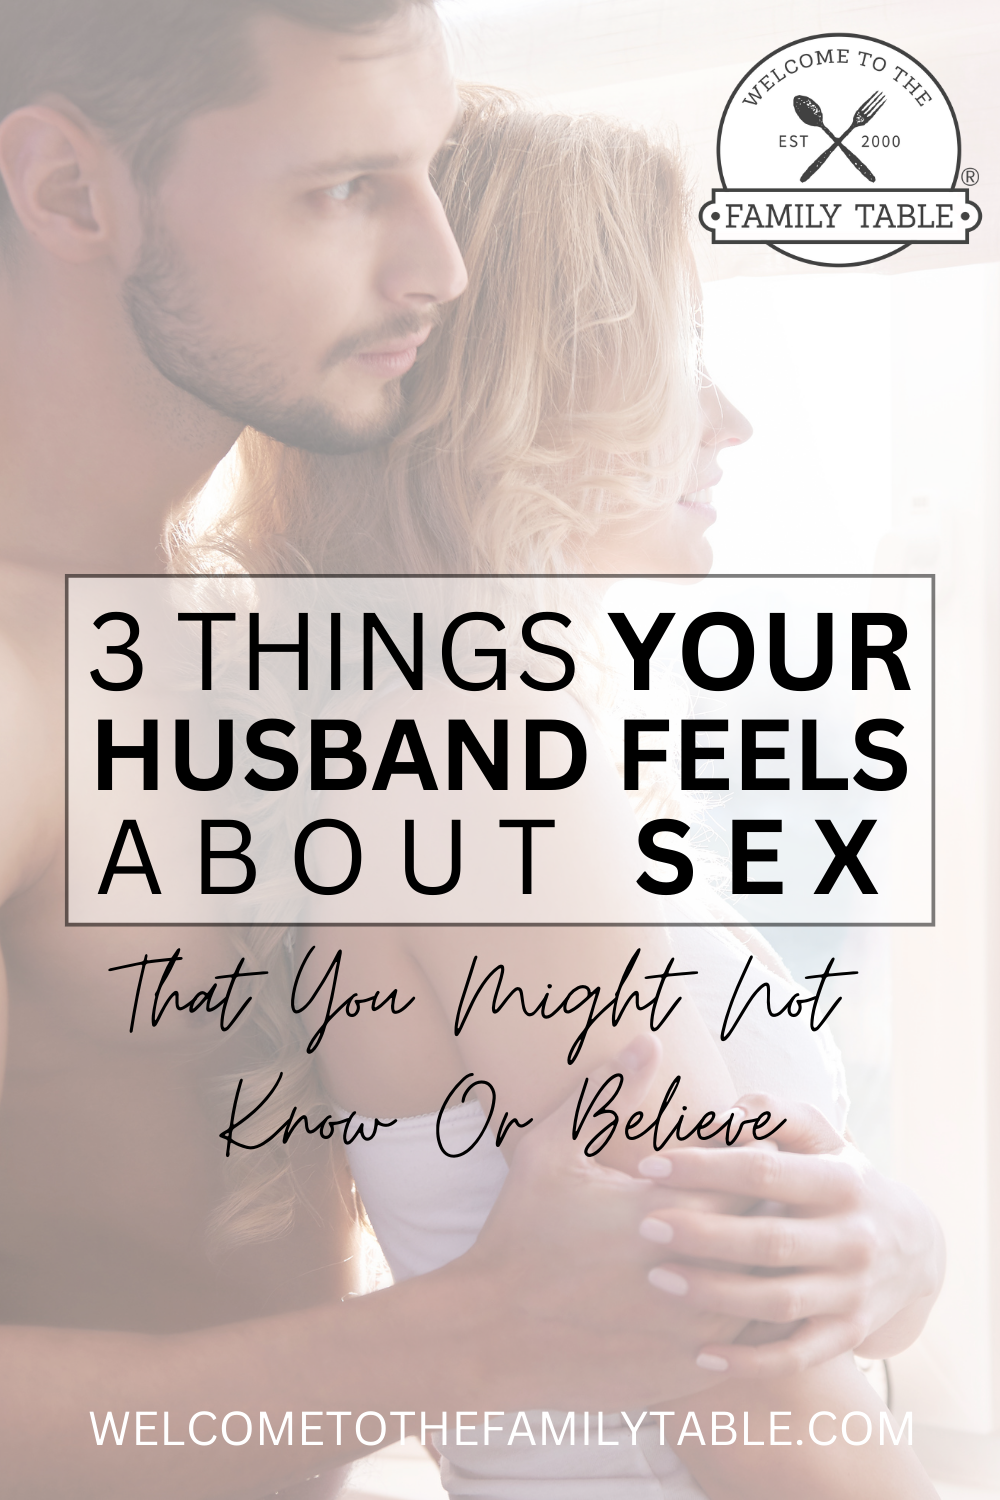 3 Things Your Husband Feels About Sex – That You Might Not Know or Believe